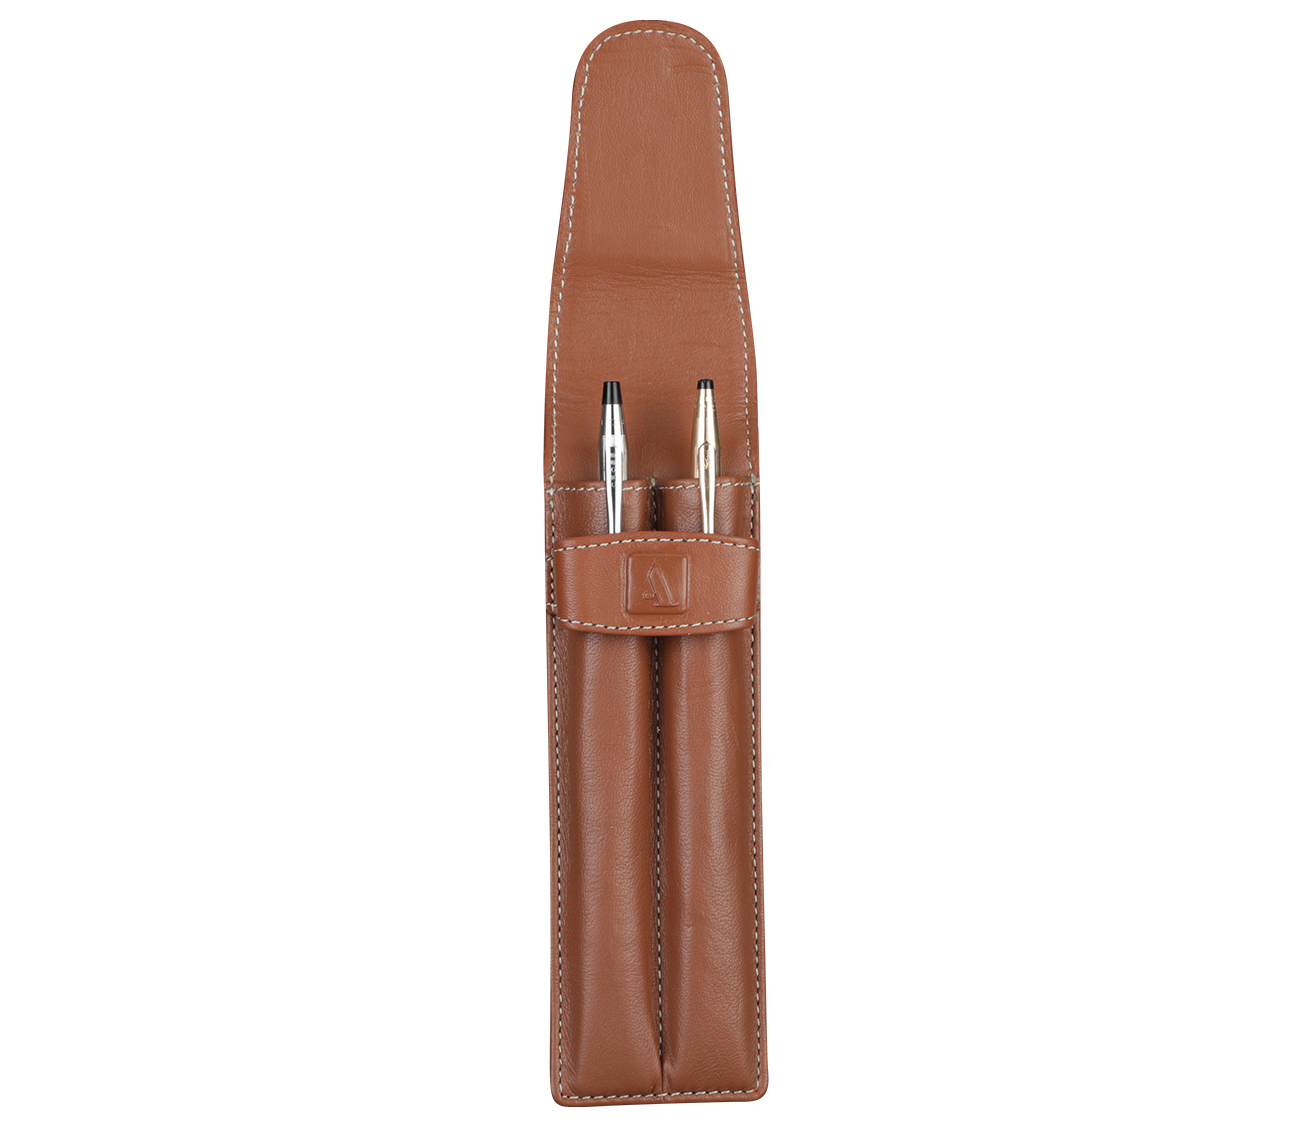 W51--Pen case to carry 2 pens in Genuine Leather - Tan